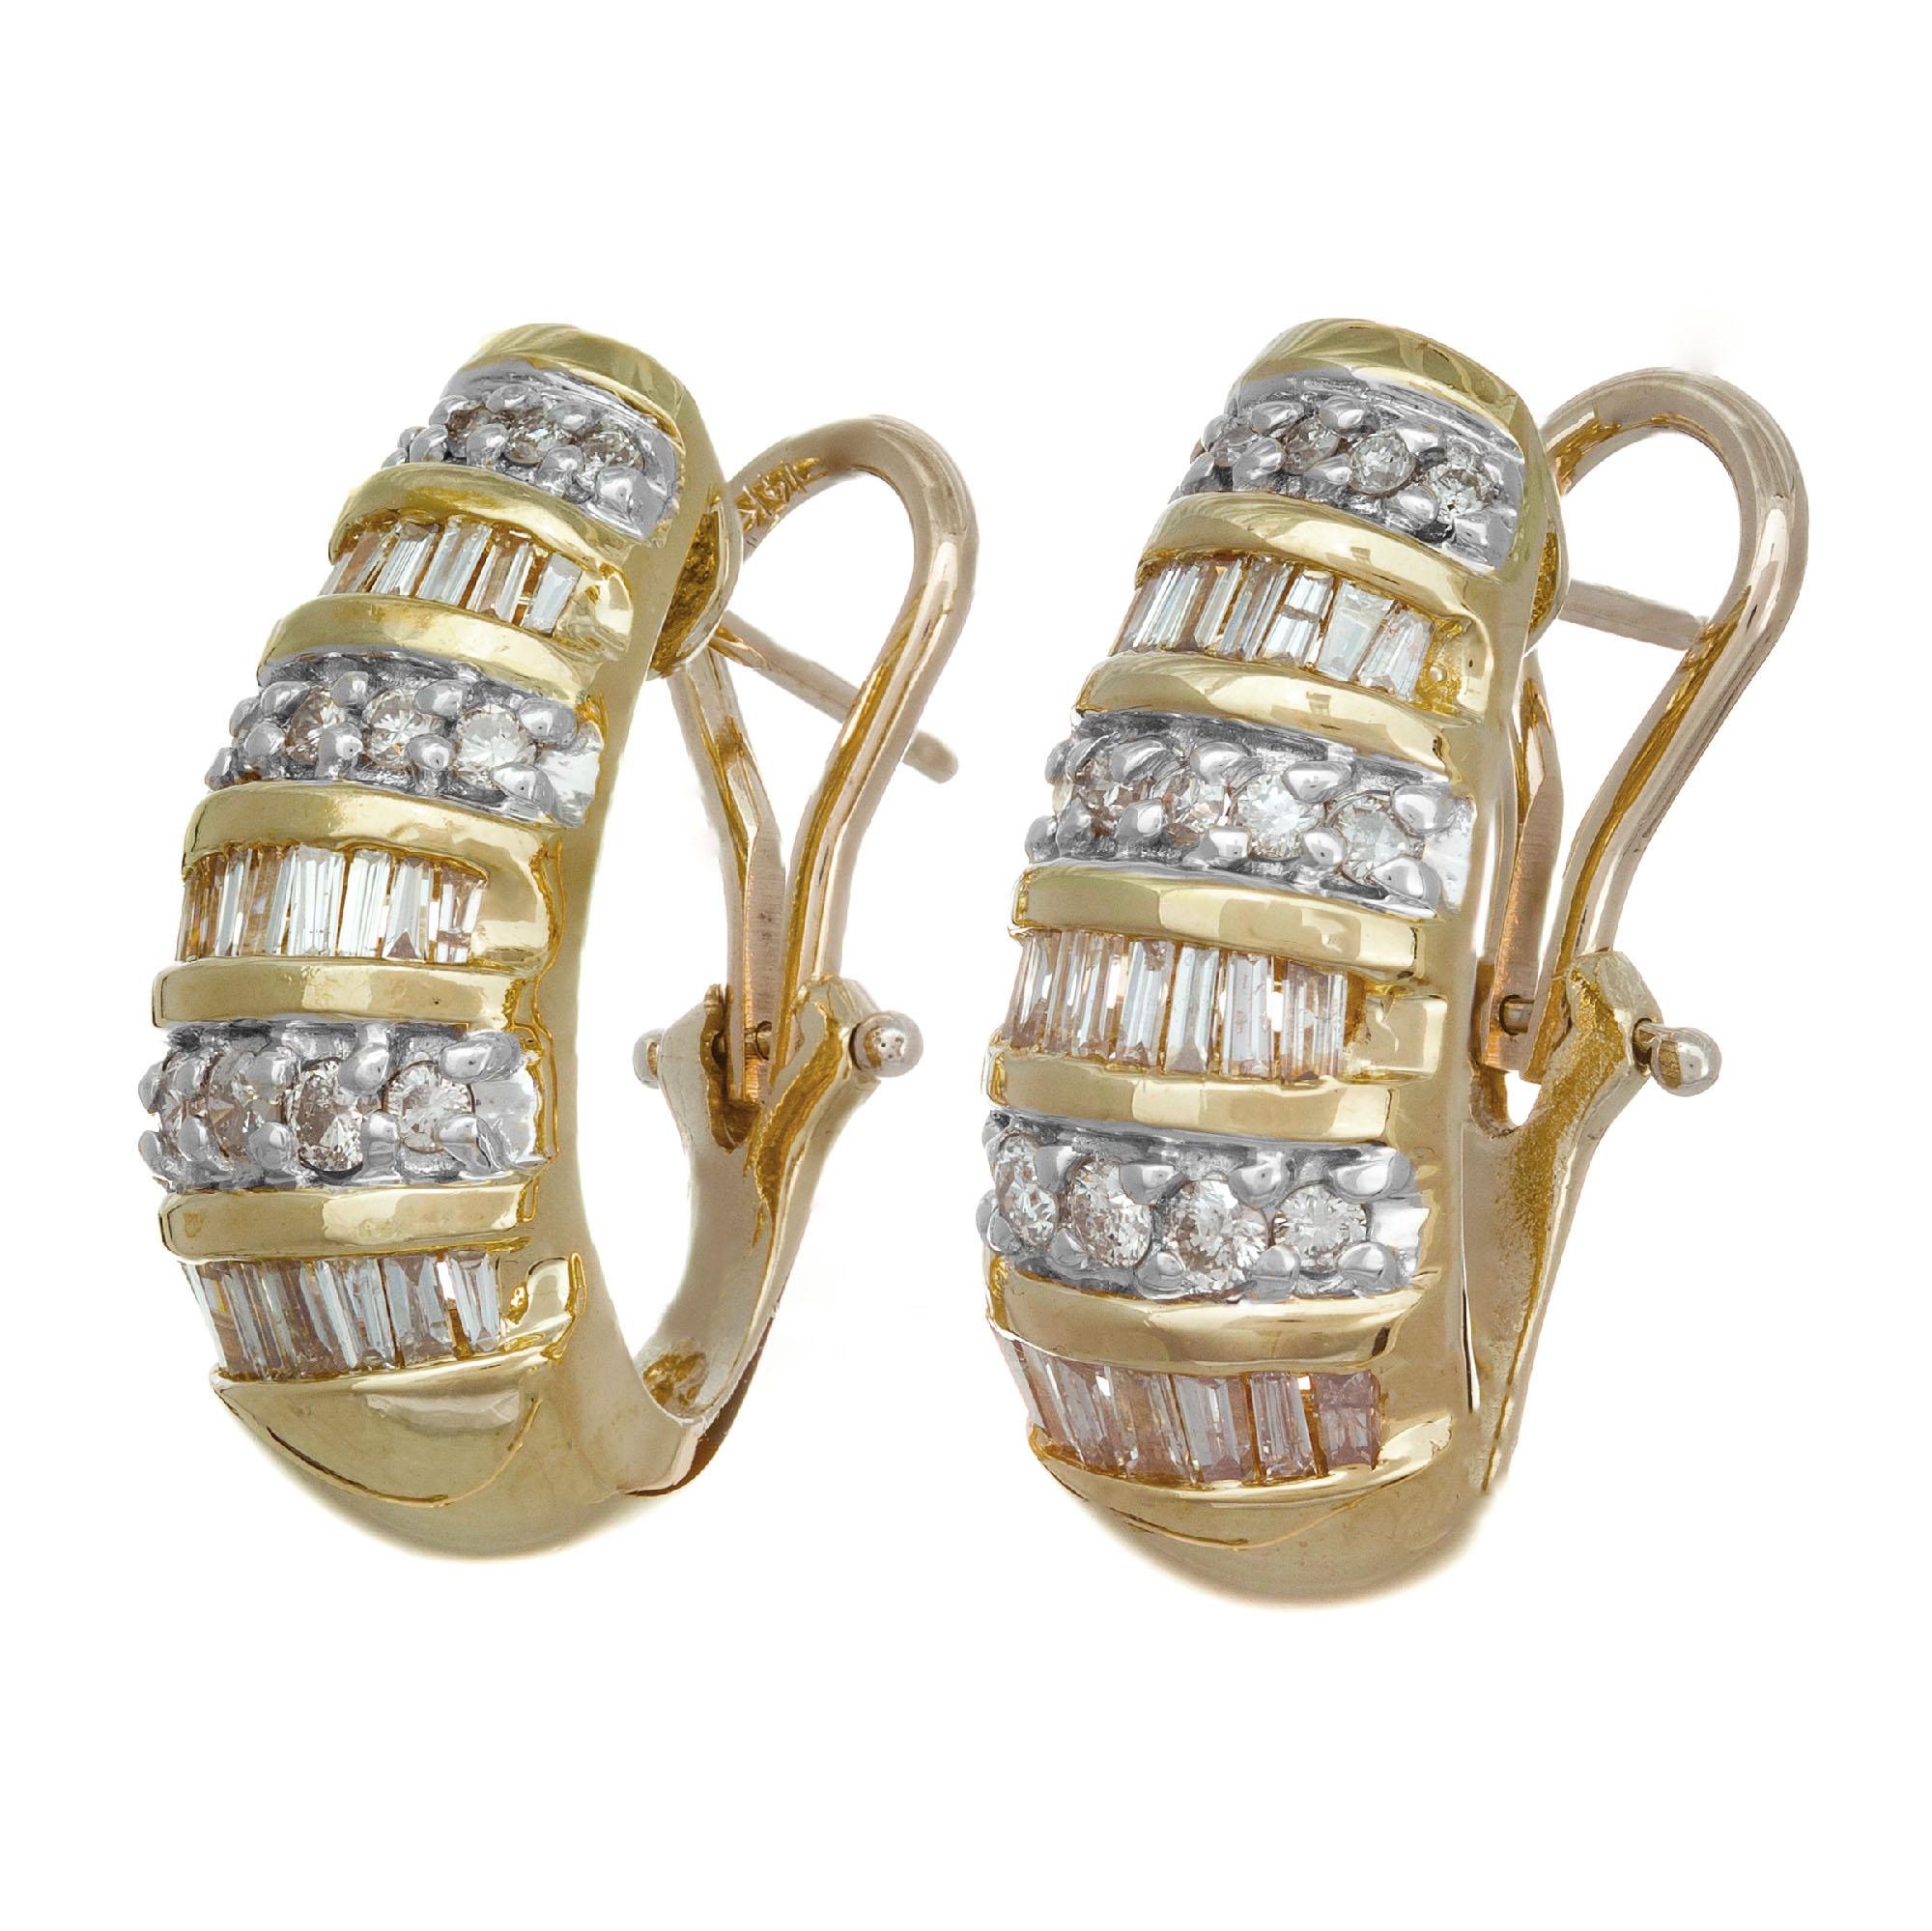 Clip post hoop earrings with 1.55 carats of baguette and round diamonds in 14k yellow gold 

30 round brilliant cut diamonds I-J SI-I, approx. .45cts
46 tapered baguette diamonds I-J SI-I, approx. 1.10cts
14k yellow gold
Stamped: 14k
10 grams
Top to